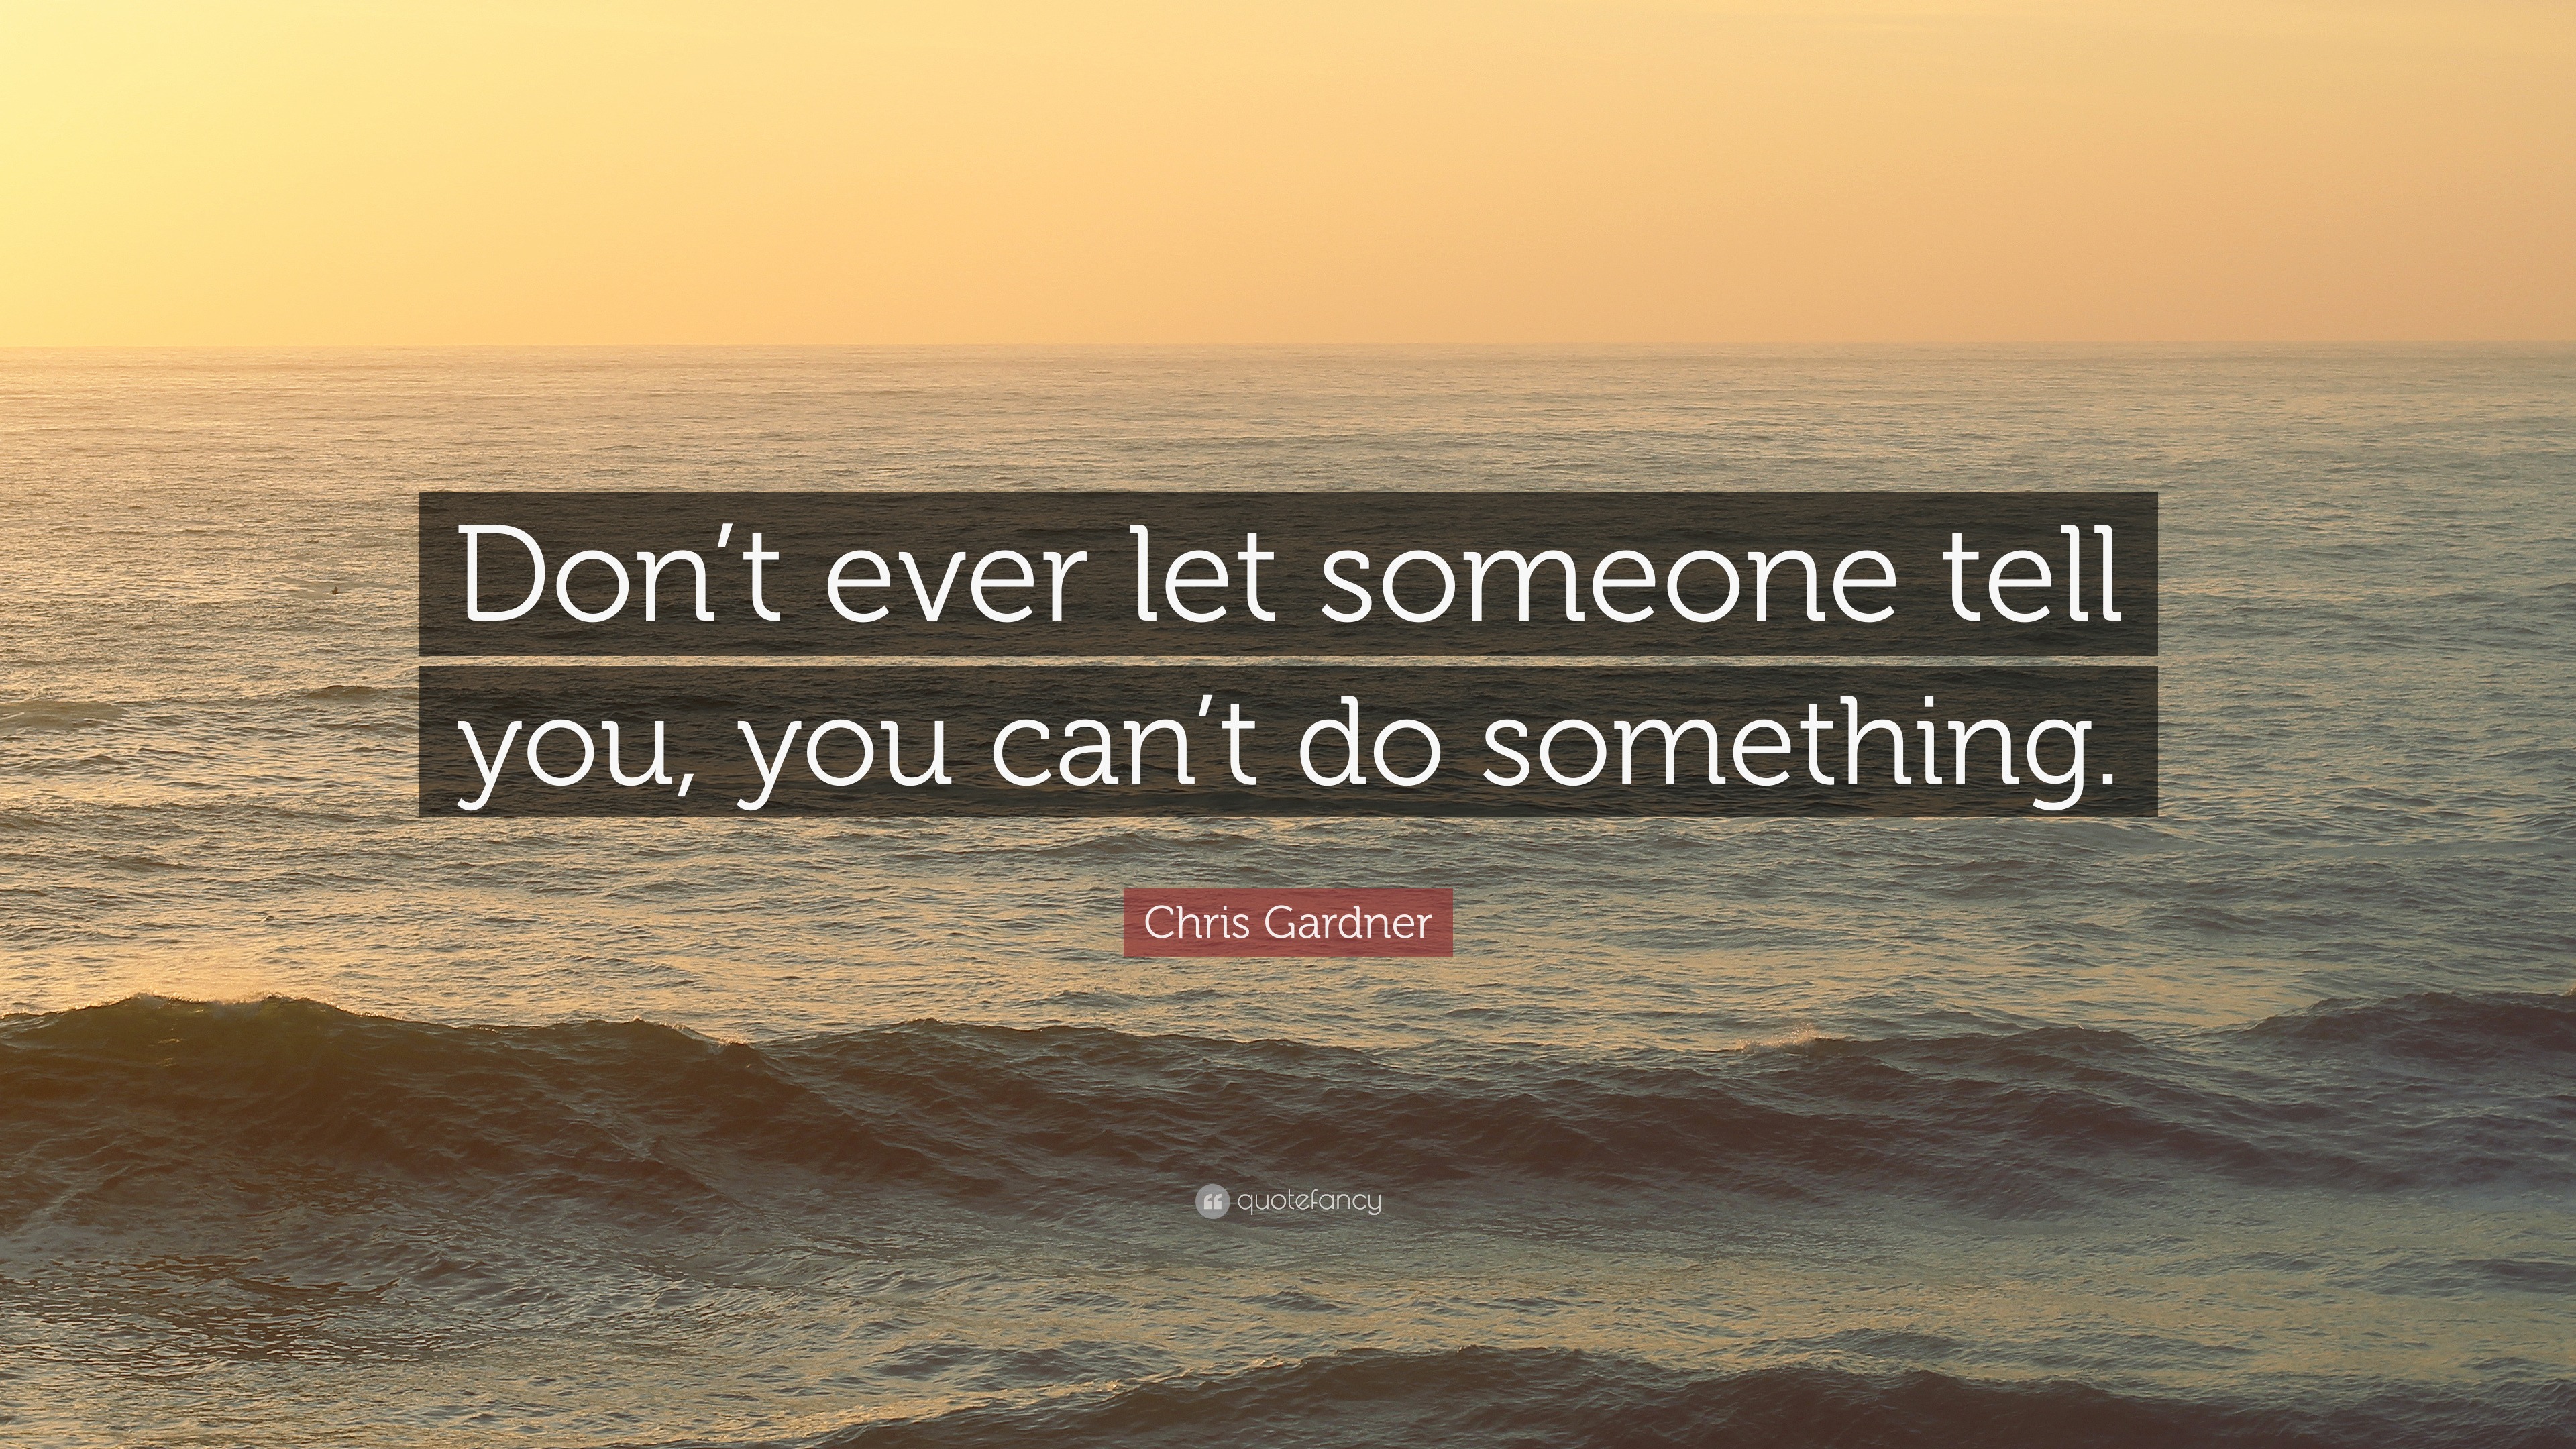 Chris Gardner Quote “dont Ever Let Someone Tell You You Cant Do Something” 0662